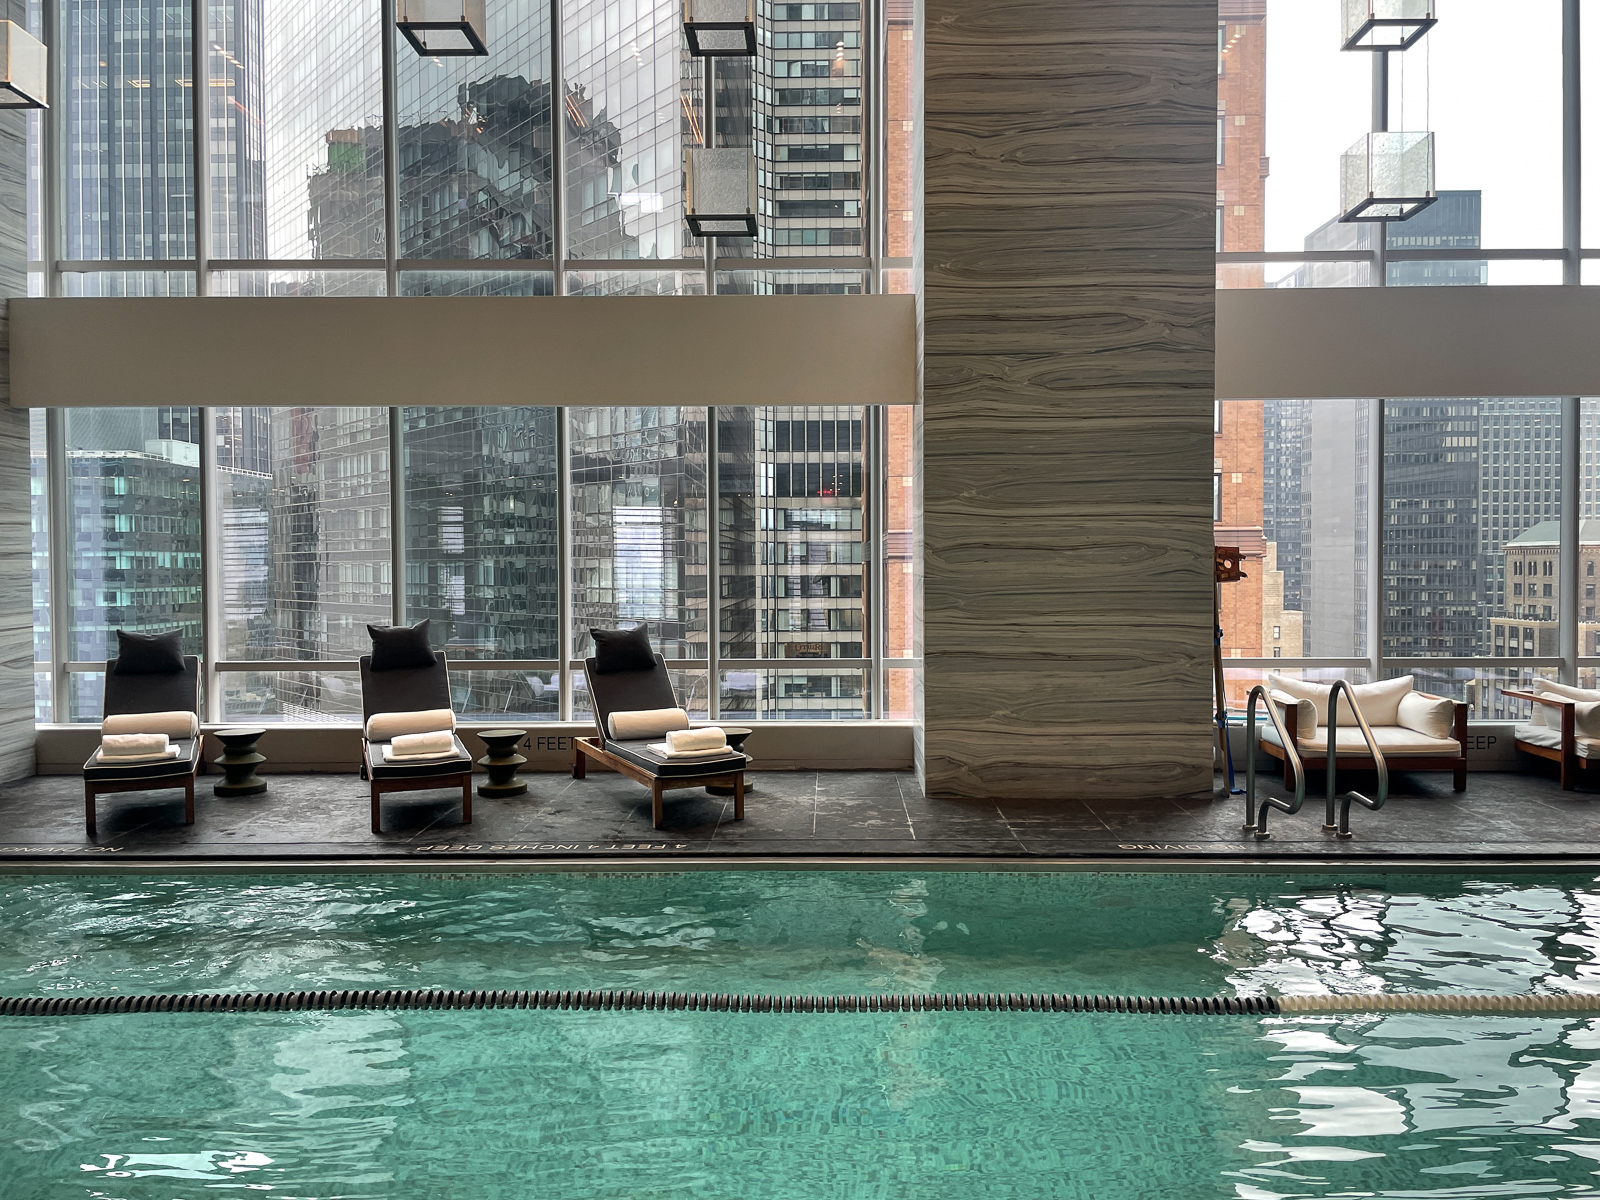 The pool at the Park Hyatt NYC.